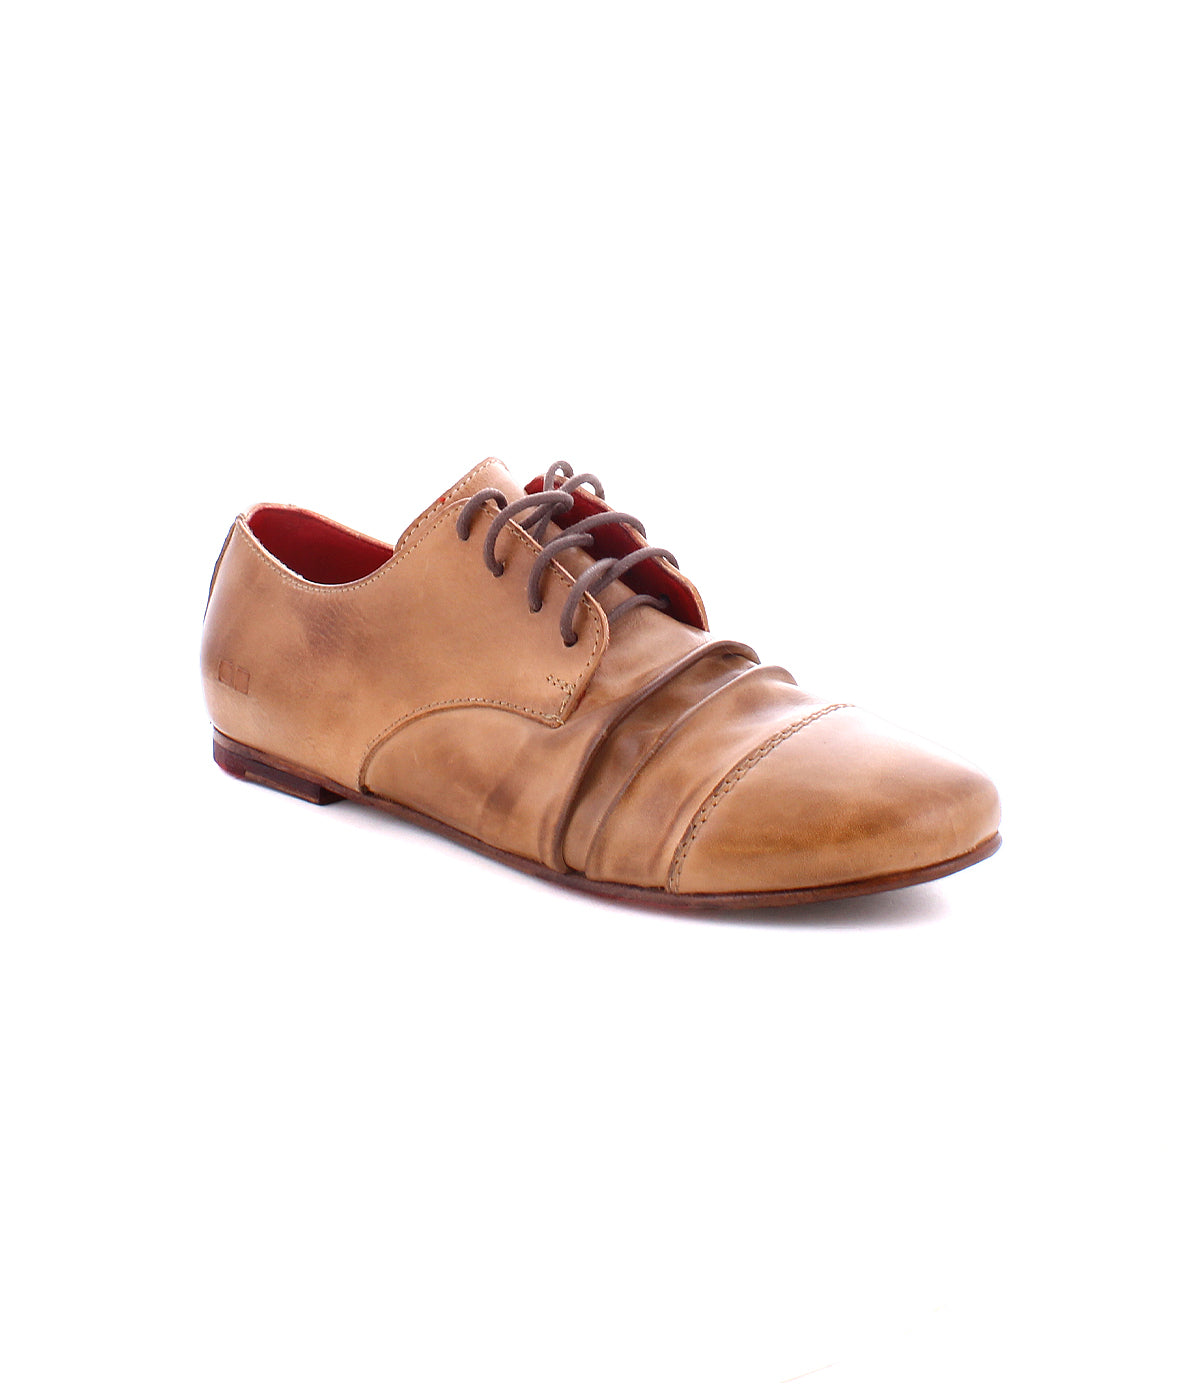 A single brown leather dress shoe with laces and a low heel, featuring a pleated design on the front and wingtip flair, the **Rumba II by Bed Stu** offers an elegant touch.